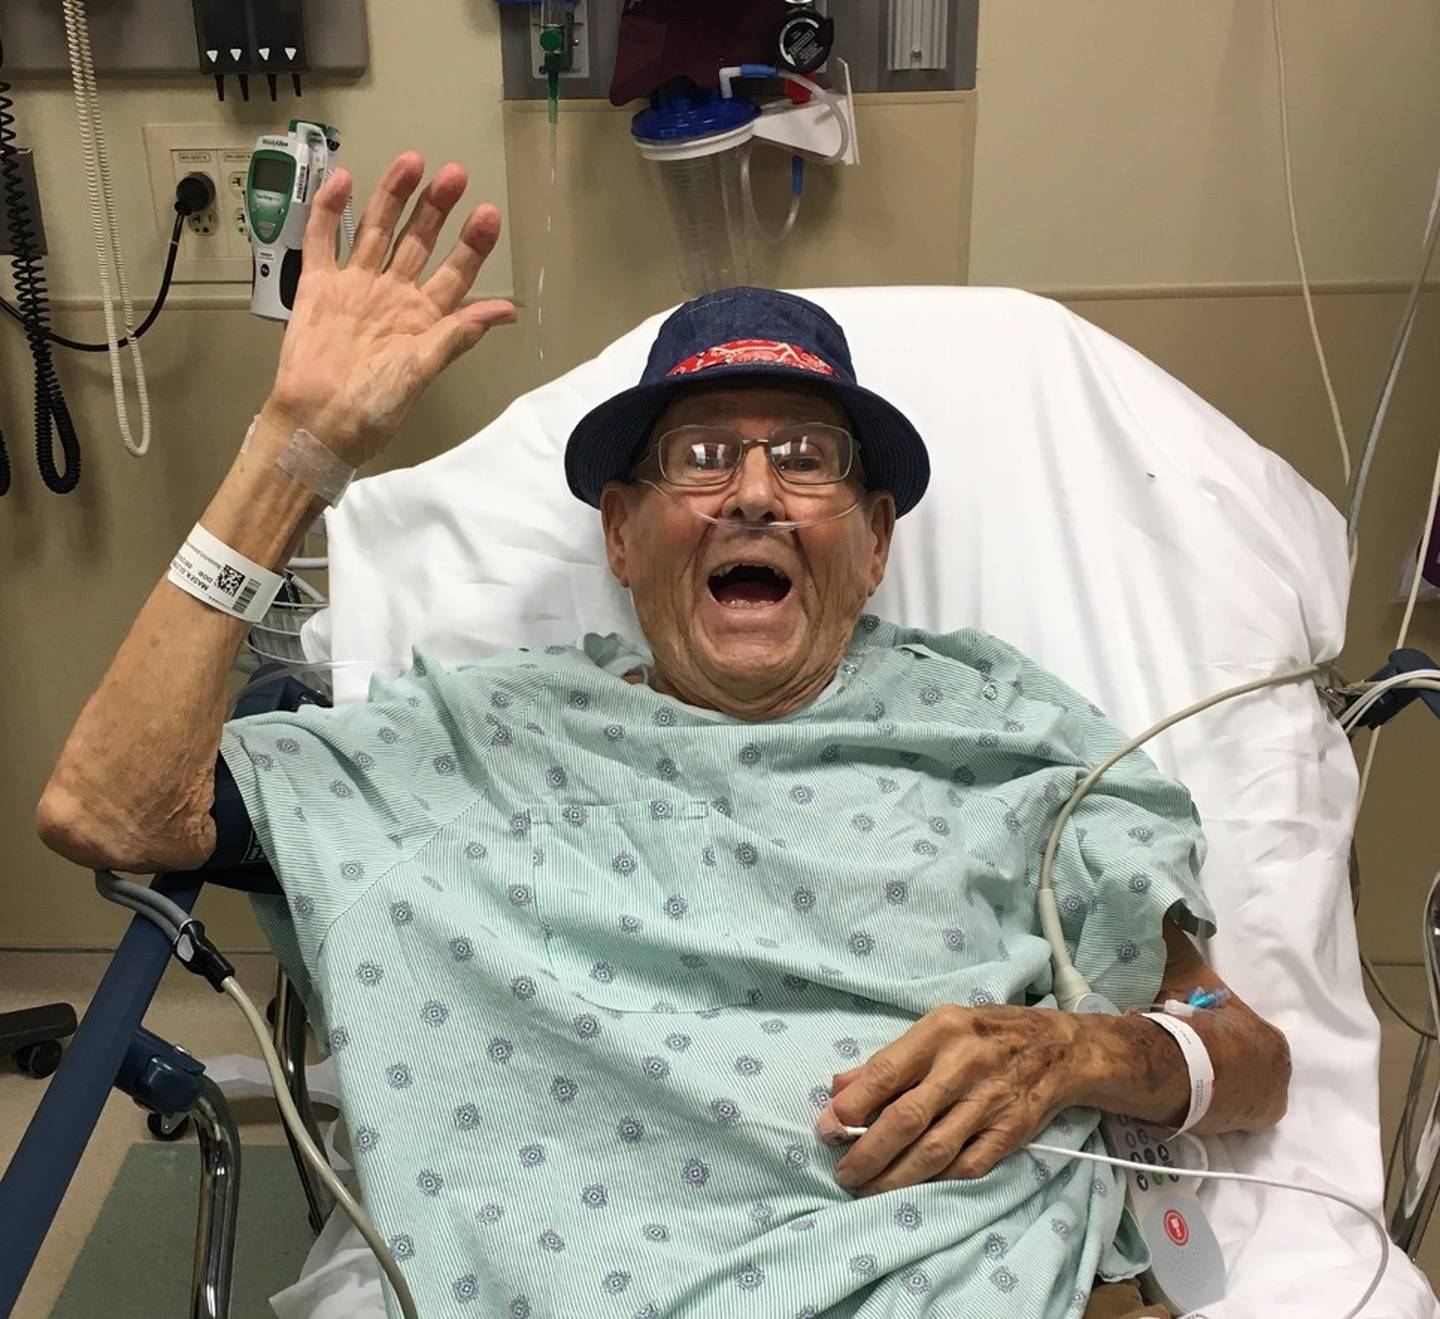 Even when he was hospitalized for pneumonia, Glenn Masek never lost his sense of humor or his love of posing for the camera.